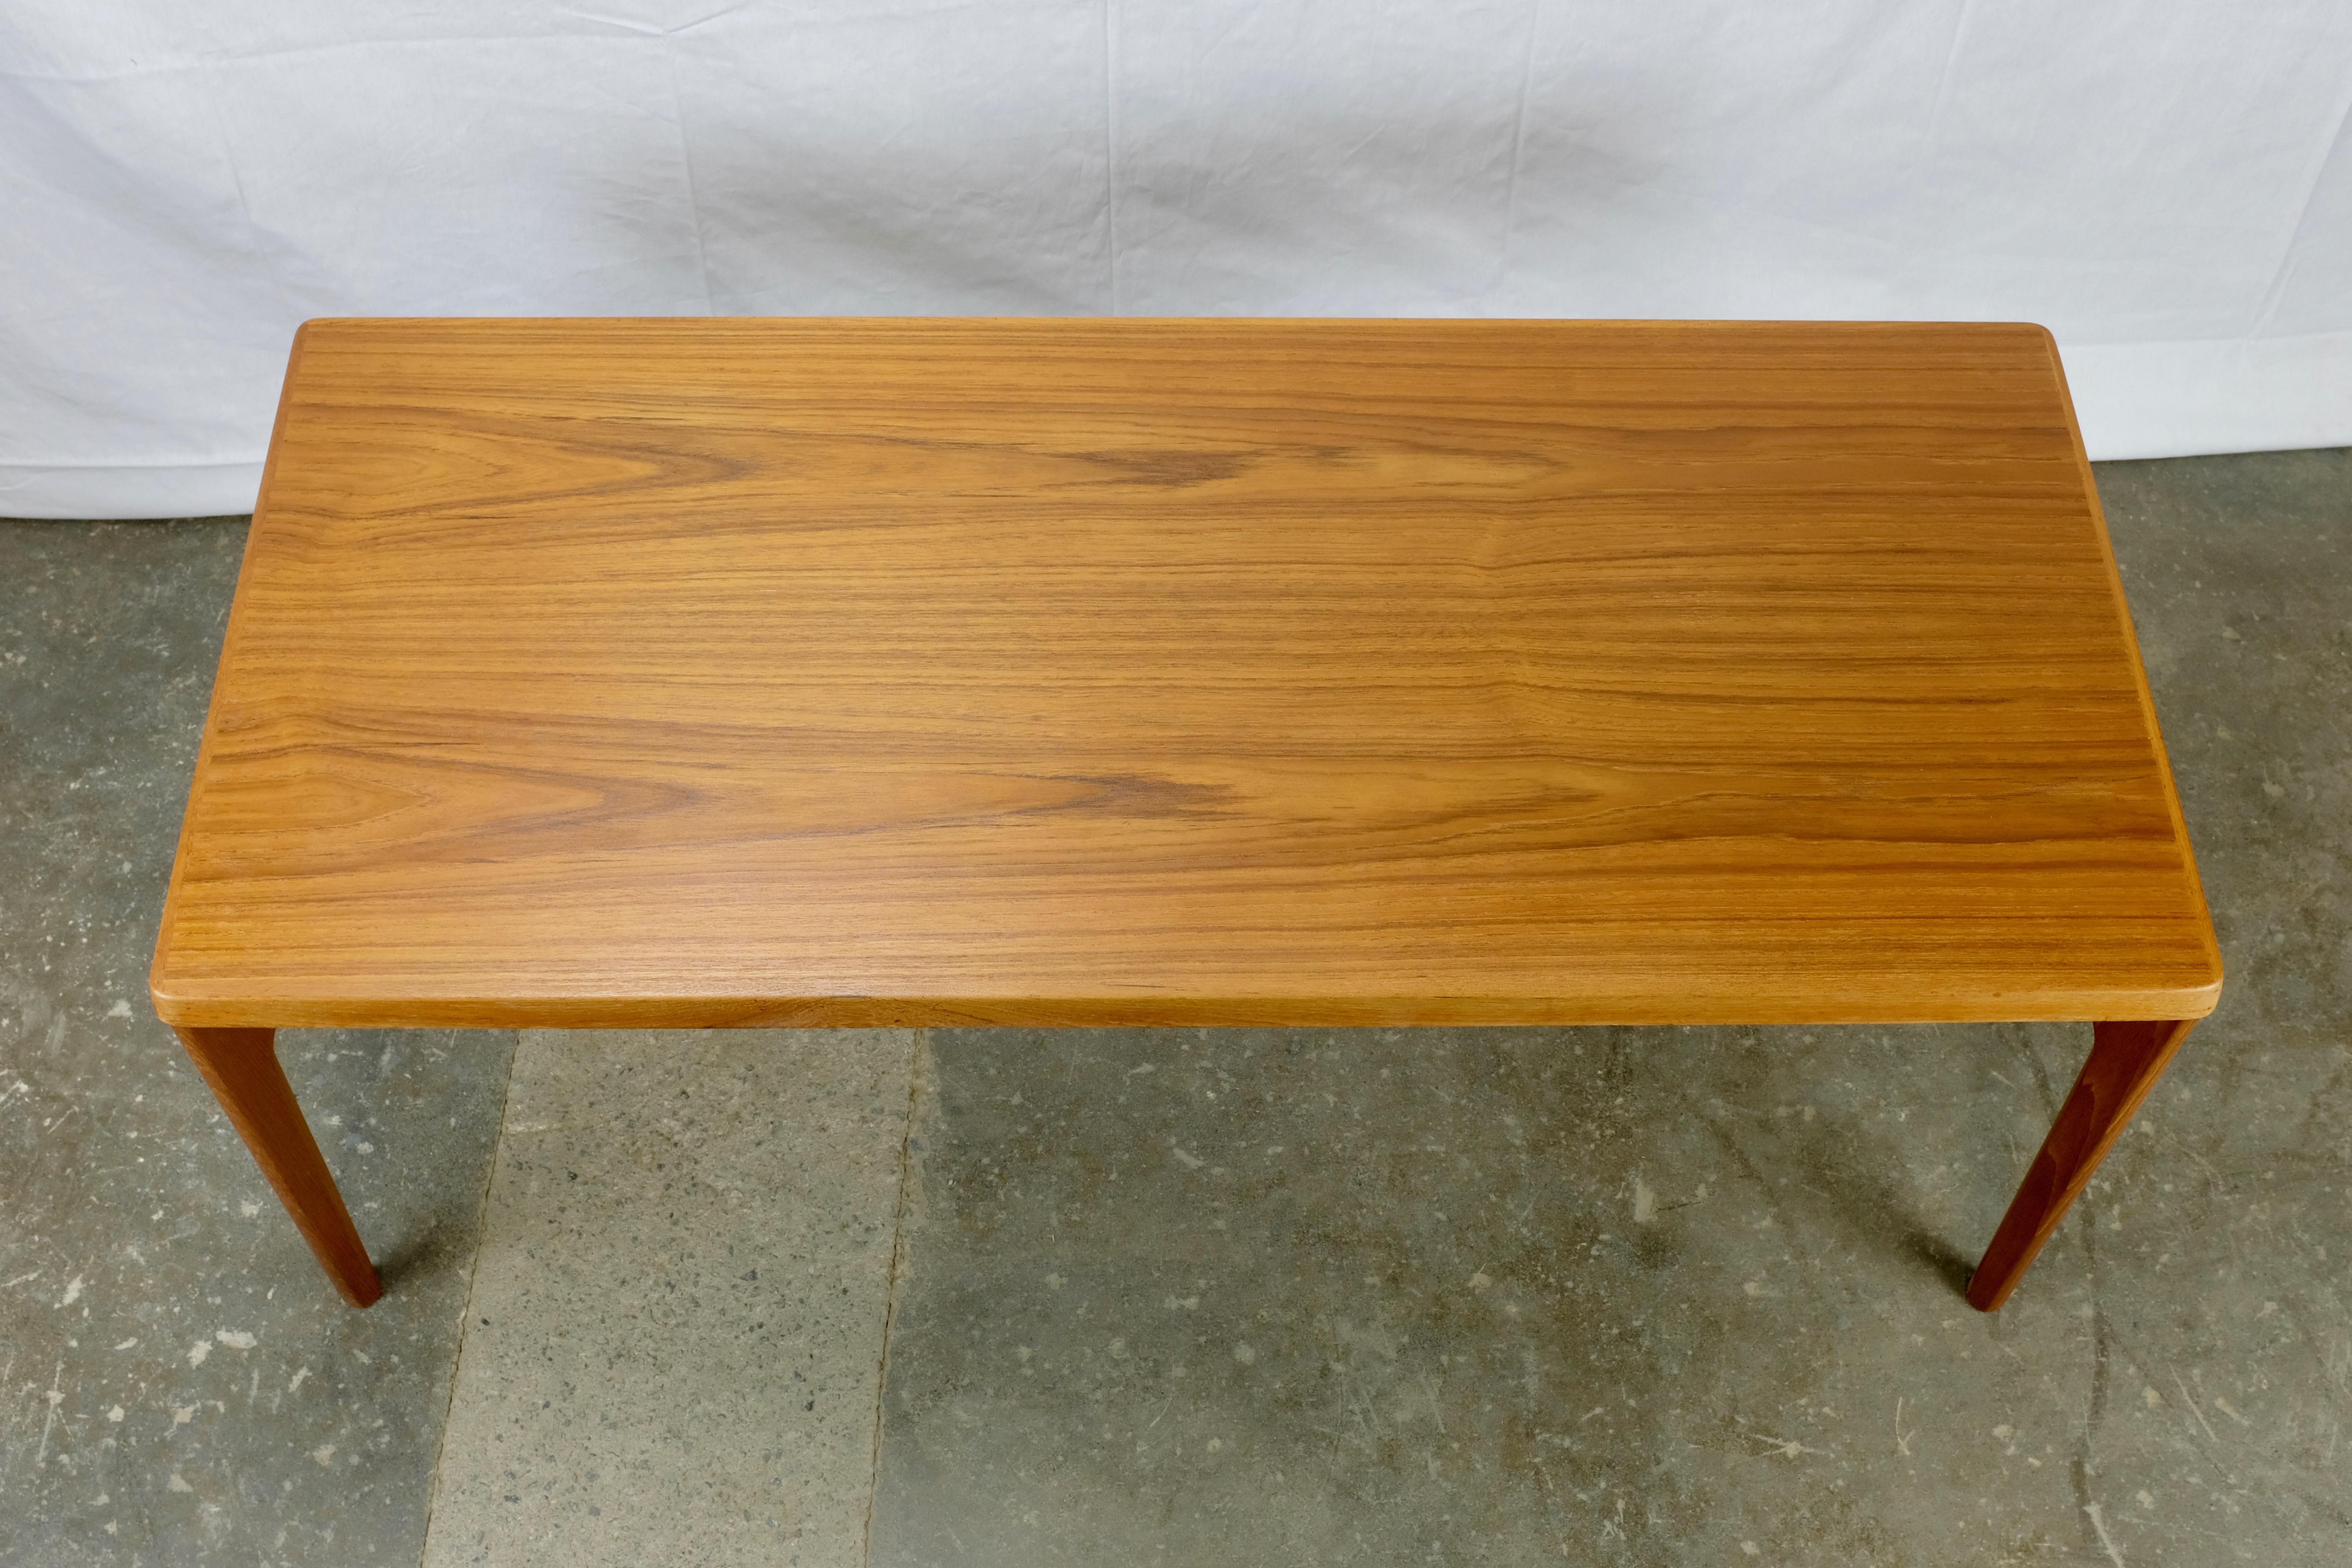 Coffee table designed by Henning Kjaernulf and made in Denmark by Vejle Stole og Møbelfabrik.

The top is teak veneer with a thick solid teak edge featuring a downward-sloping bevel. The legs and aprons are solid teak. Manufacturer's stamp on